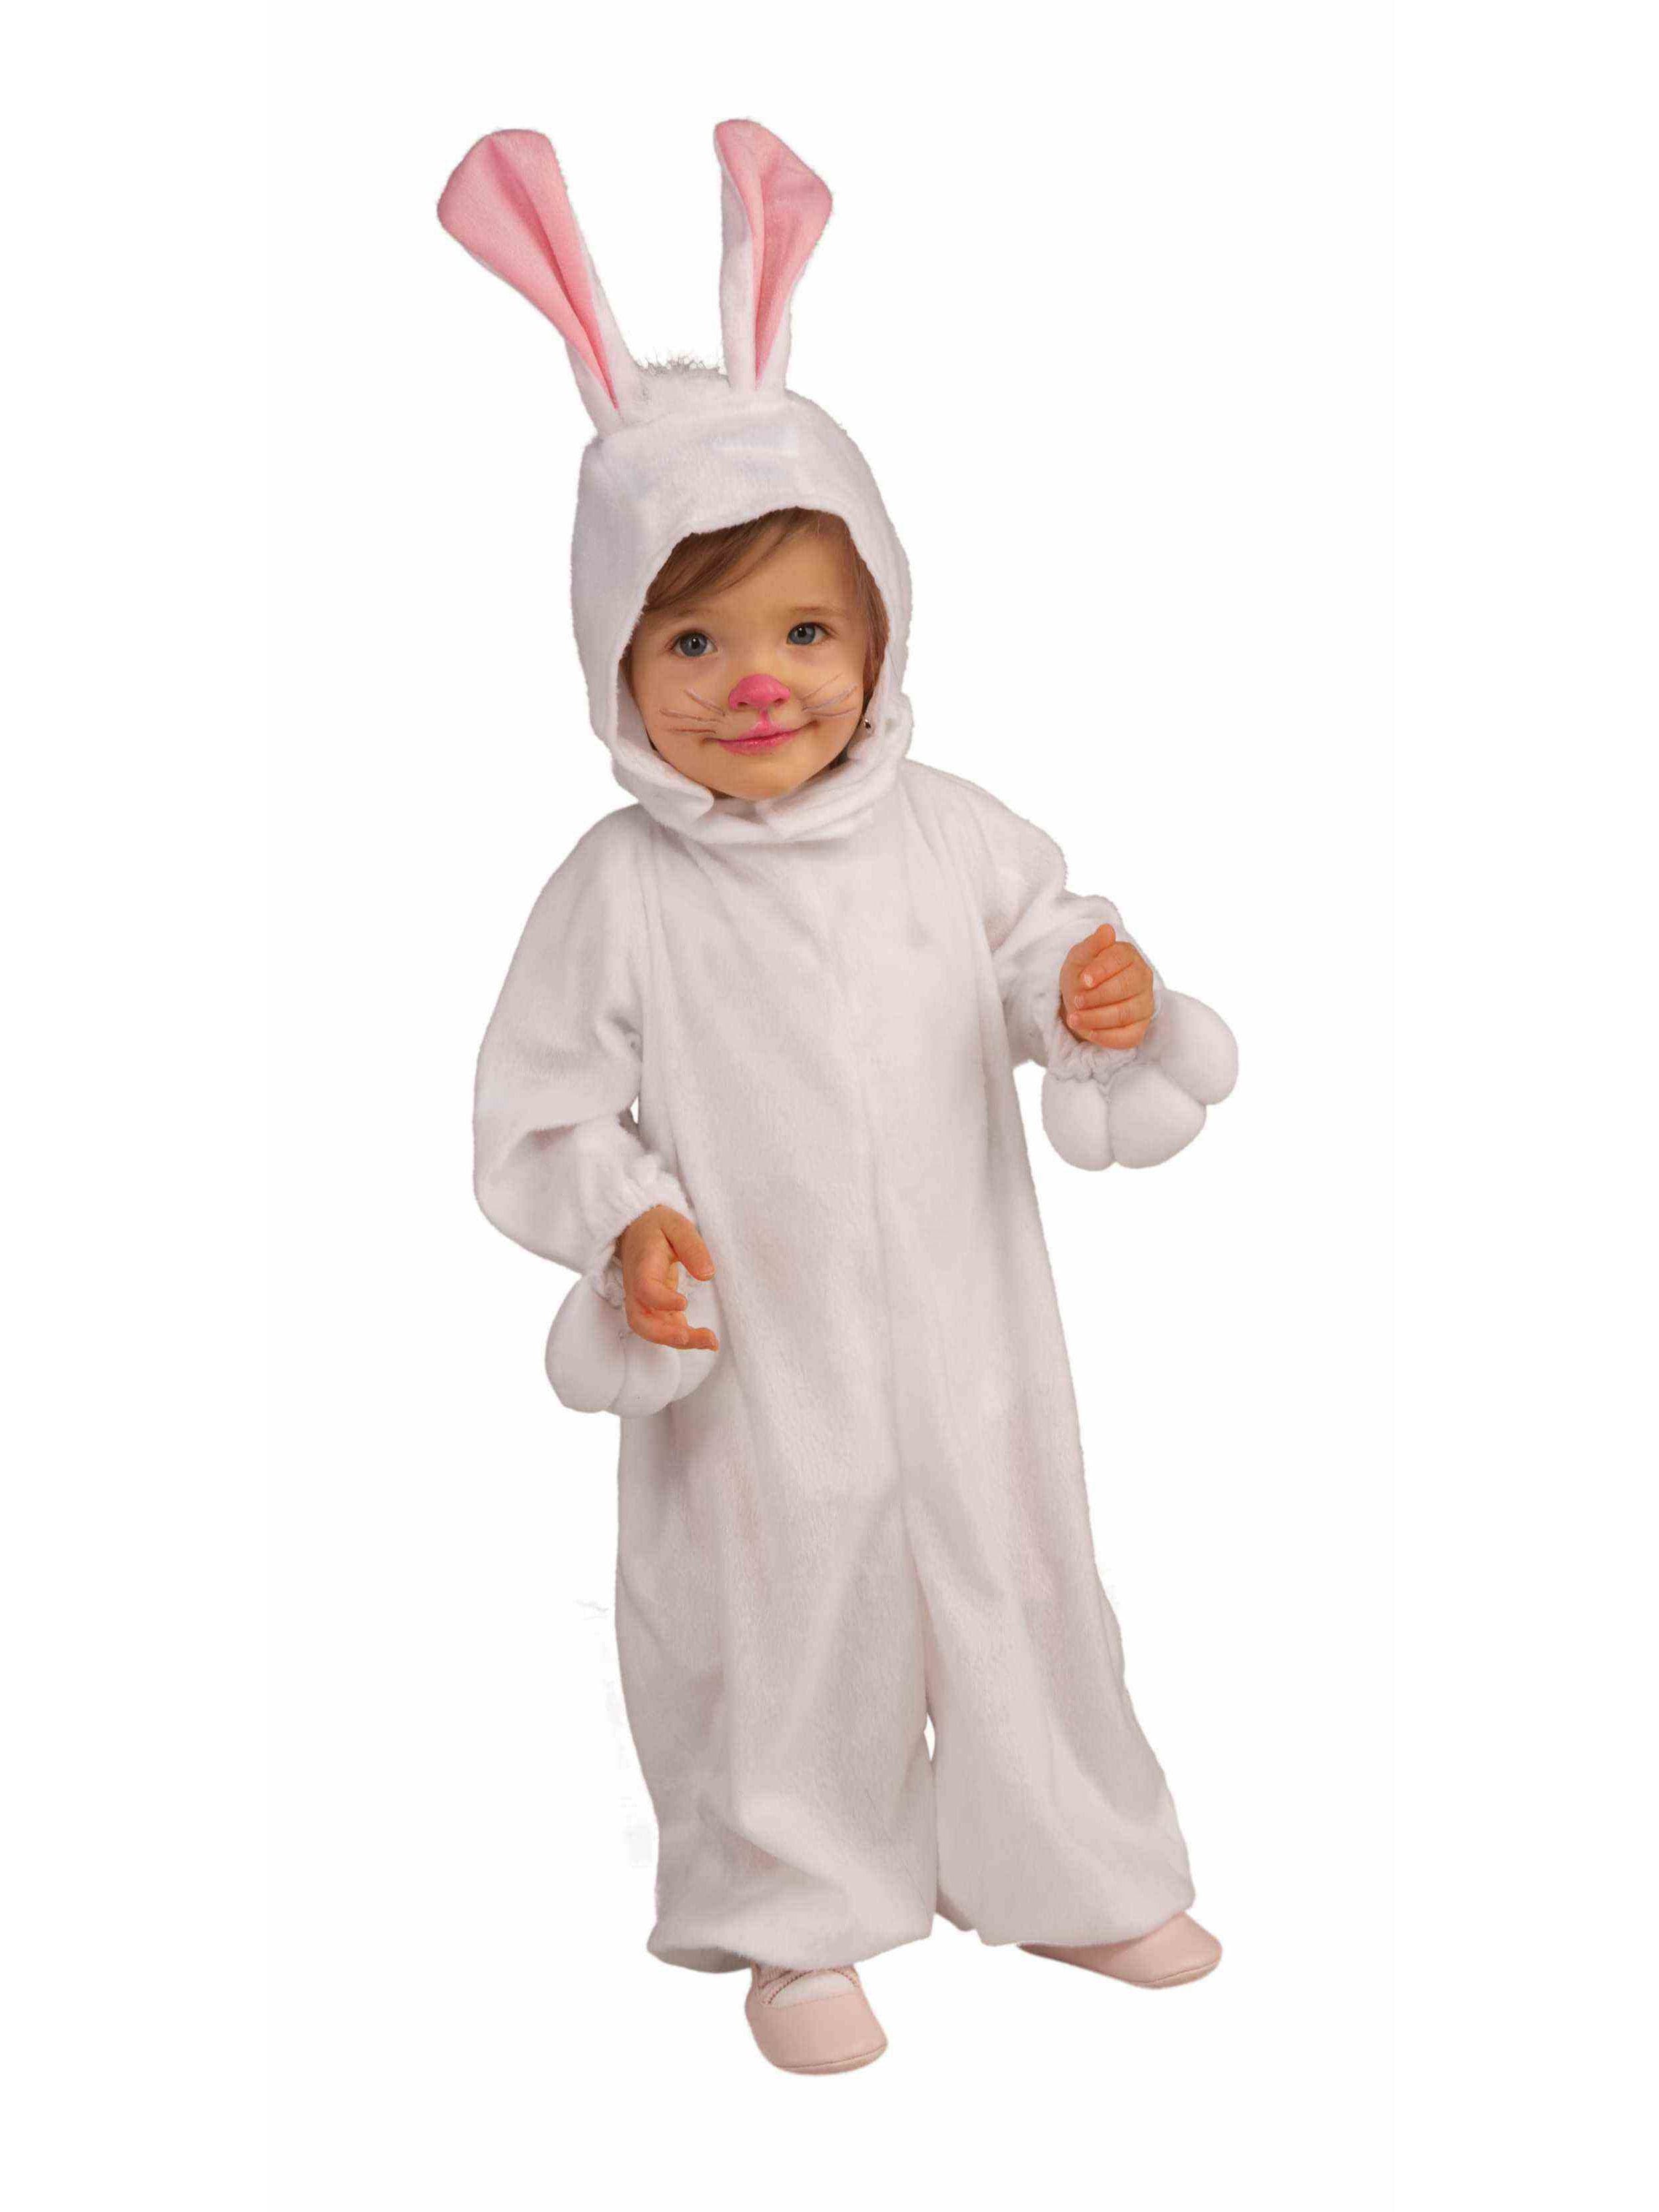 White Bunny Rabbit Costume for Toddlers - costumes.com